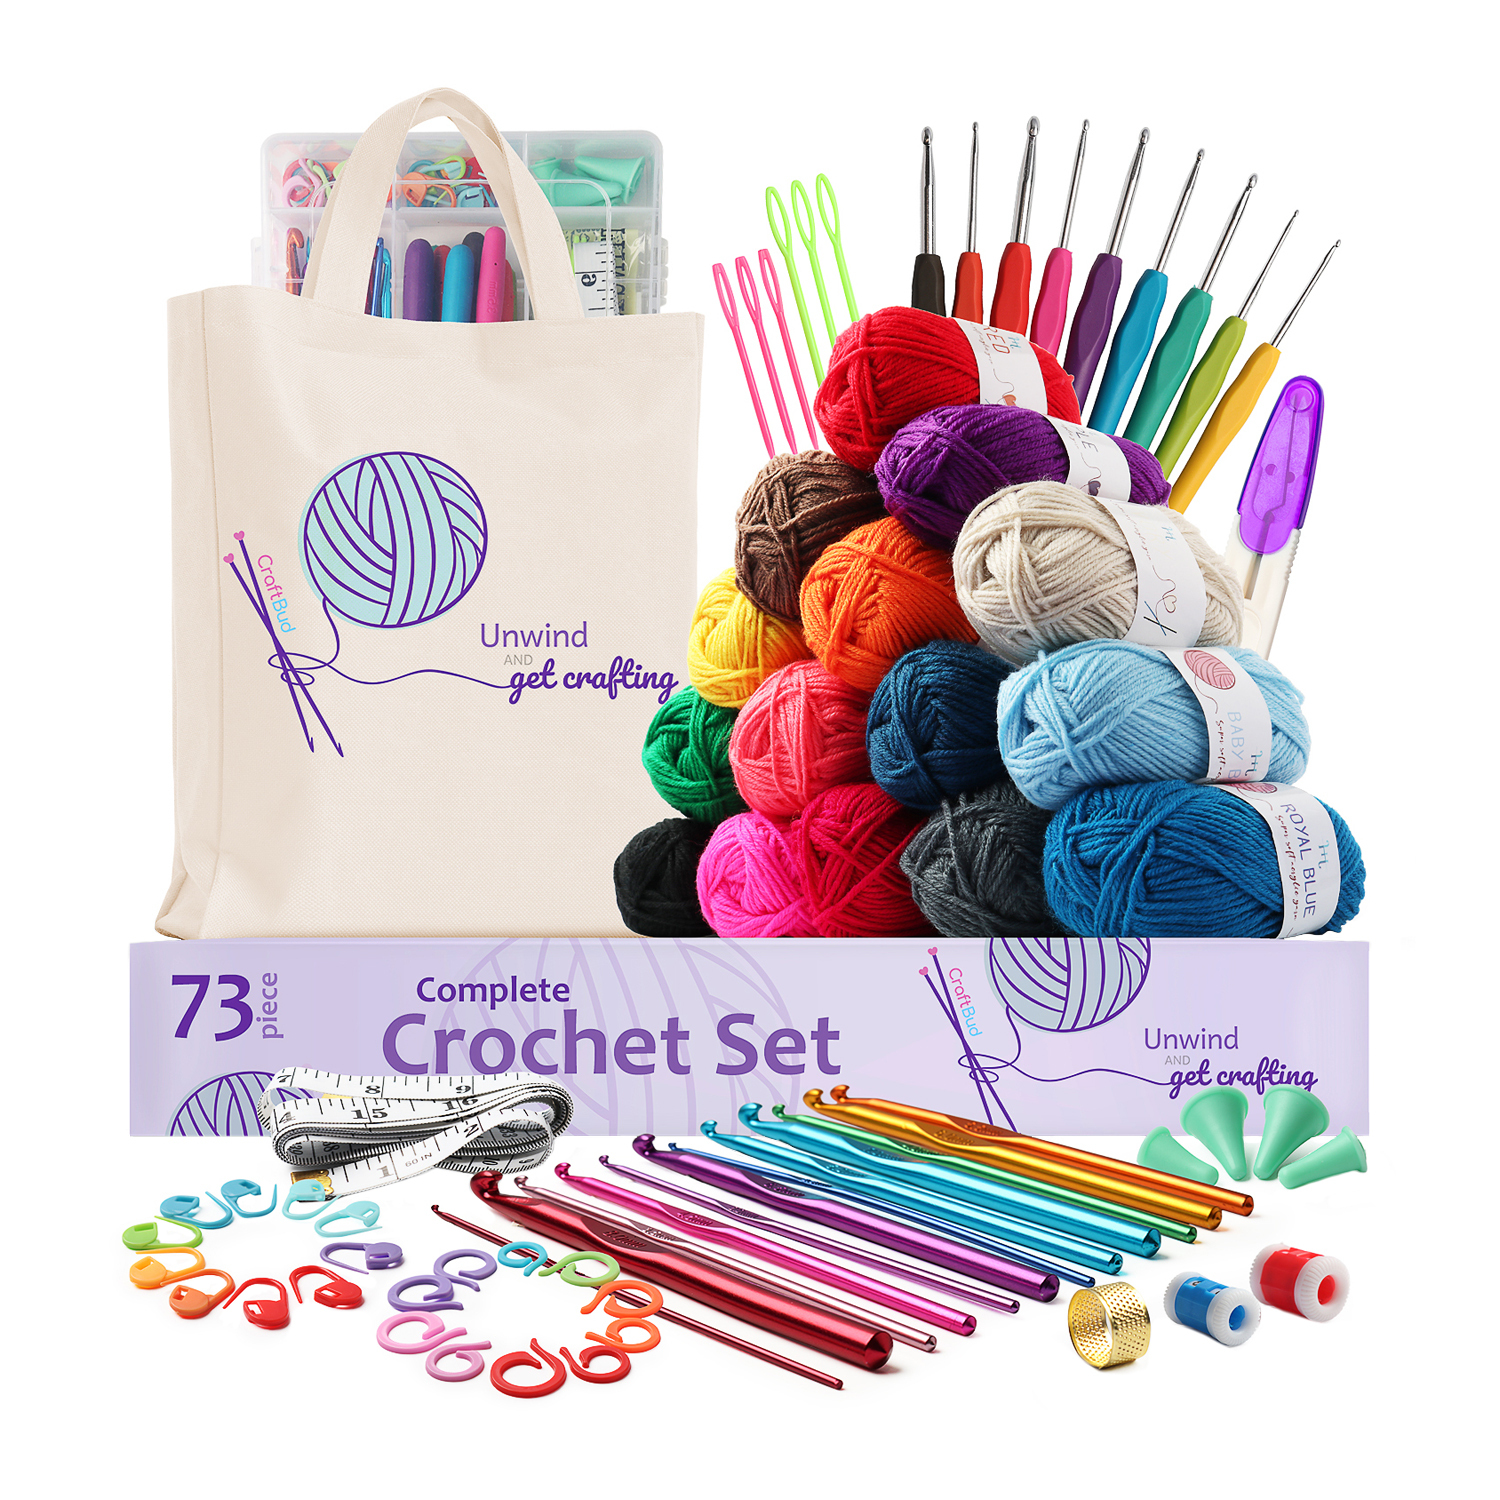 Craftbud 73 Piece Beginners Crochet Kit with Crochet Hooks Yarn Set, Premium Bundle Includes Yarn Balls, Needles, Accessories Kit, Canvas Tote Bag for Travel - image 1 of 9